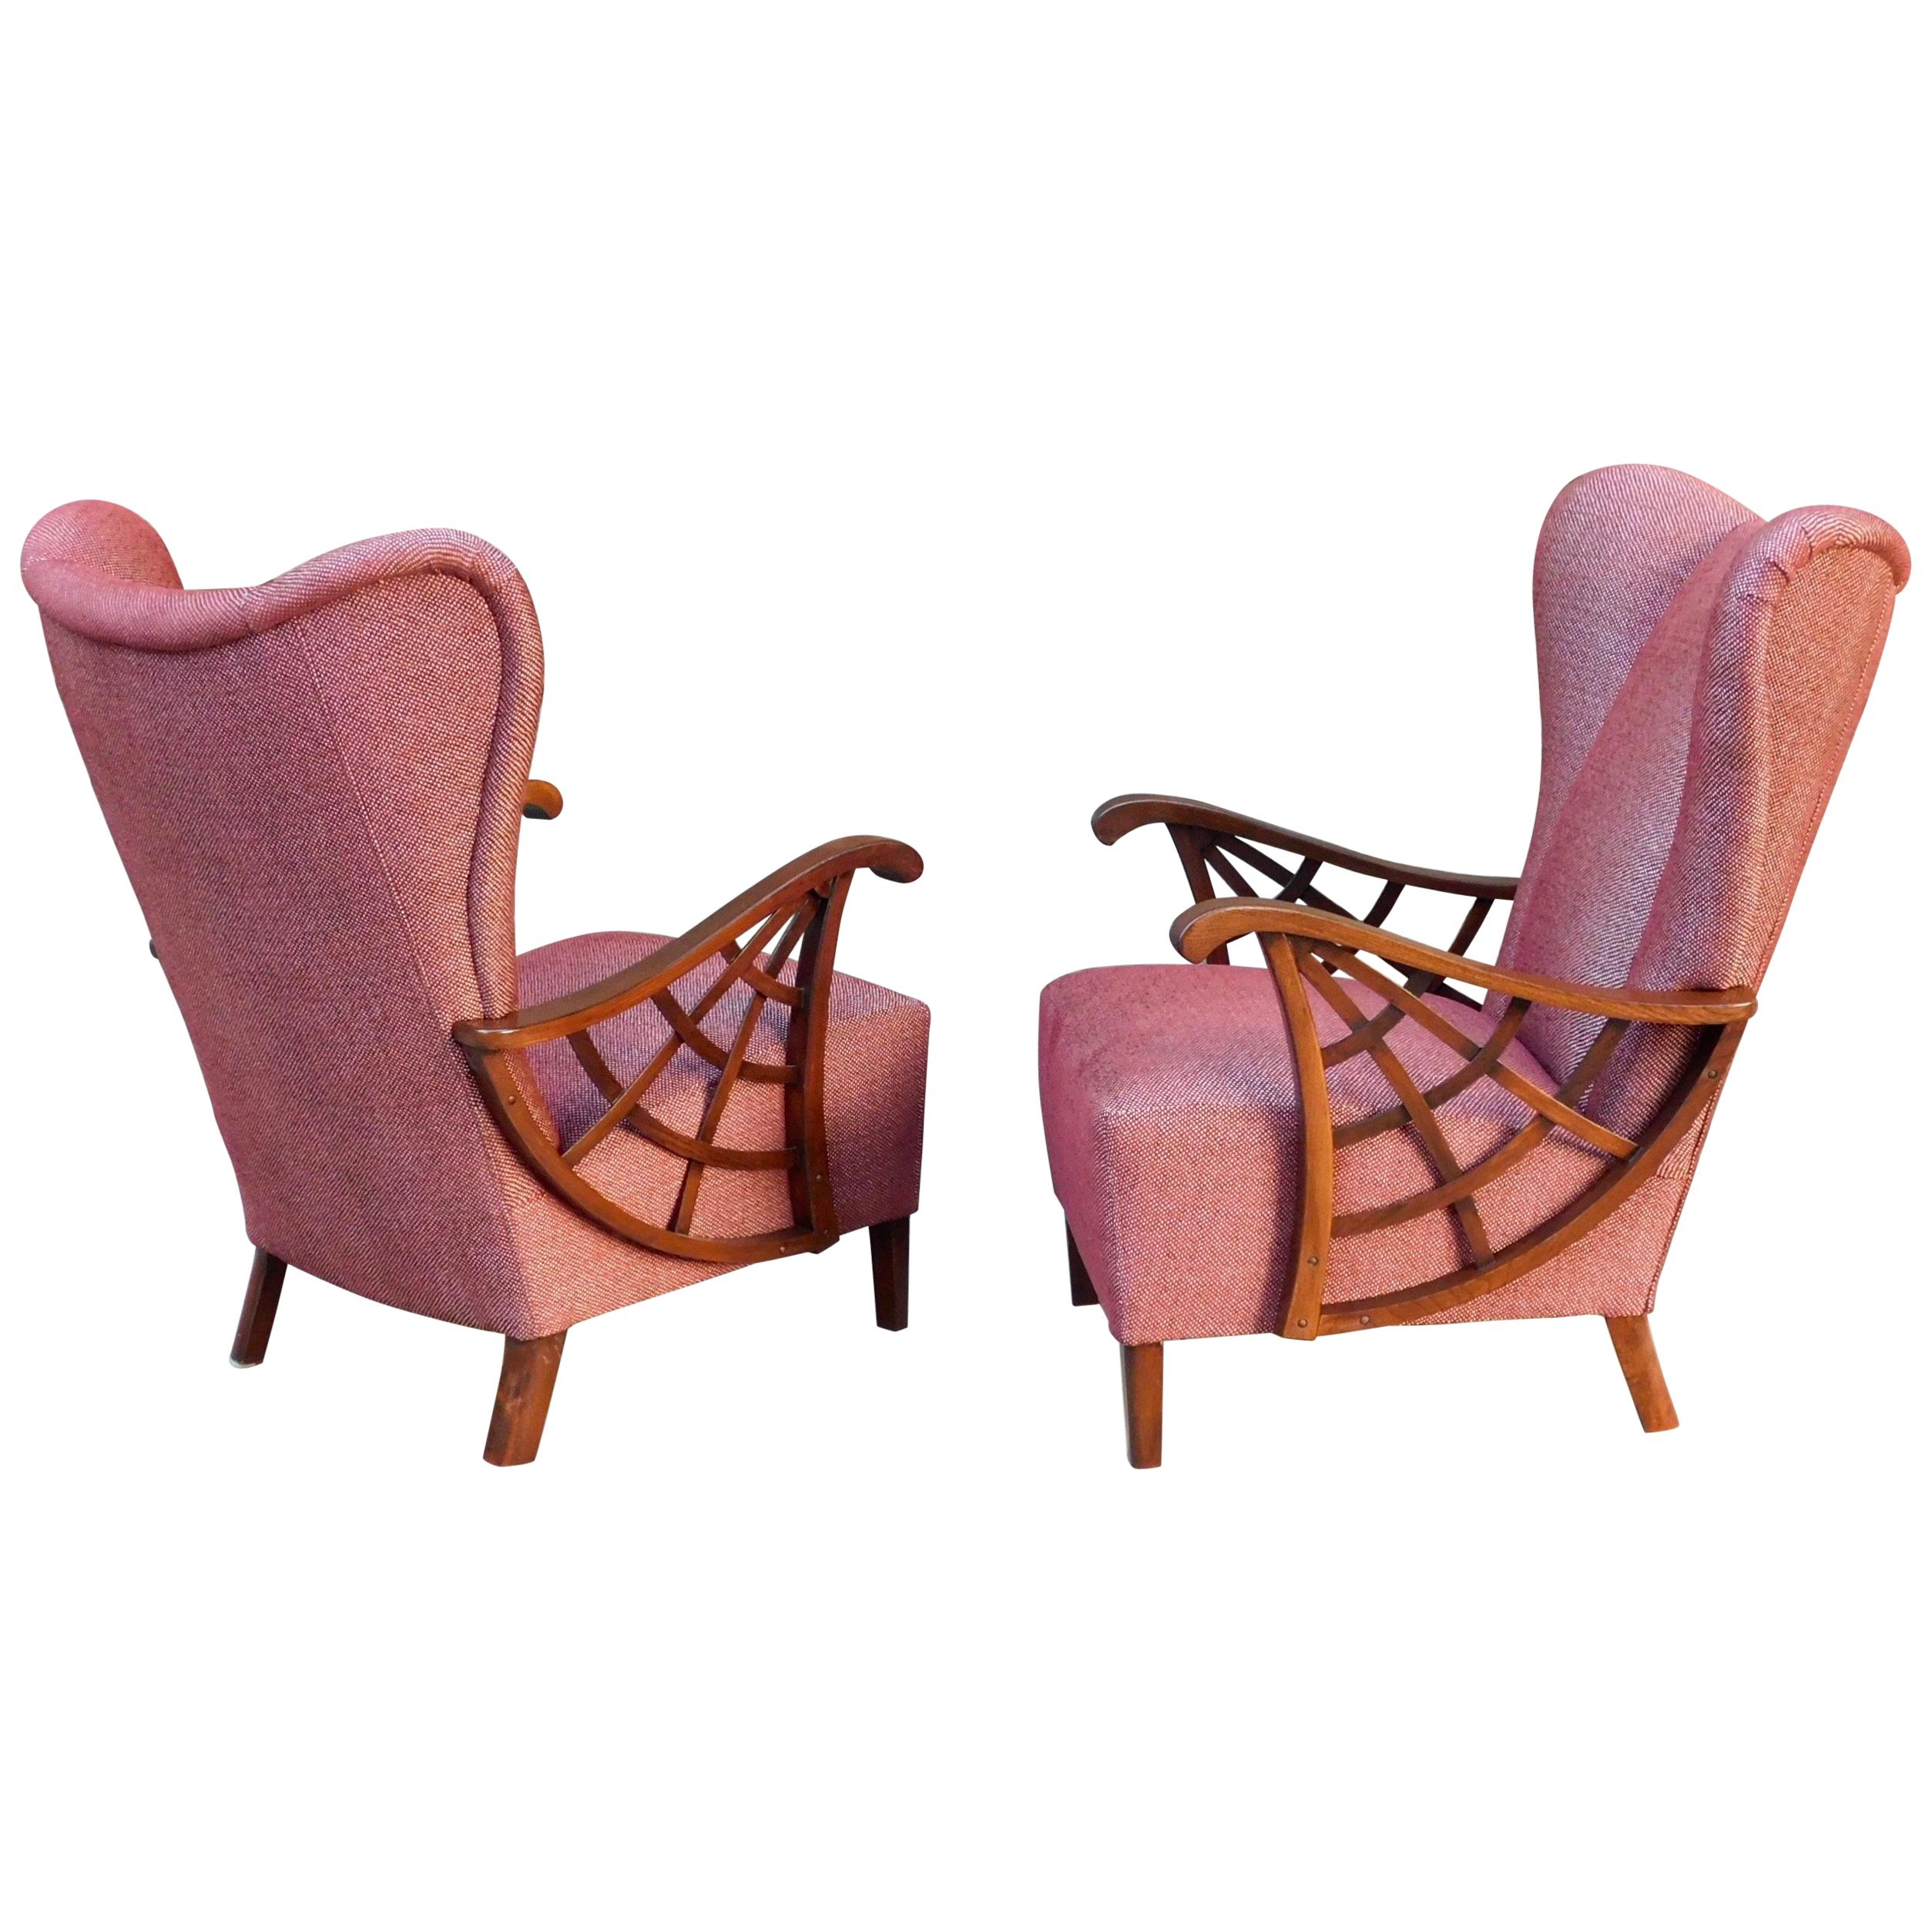 Pair of Swedish Modernist Winged Back Spider Web Armchairs, circa 1940 For Sale